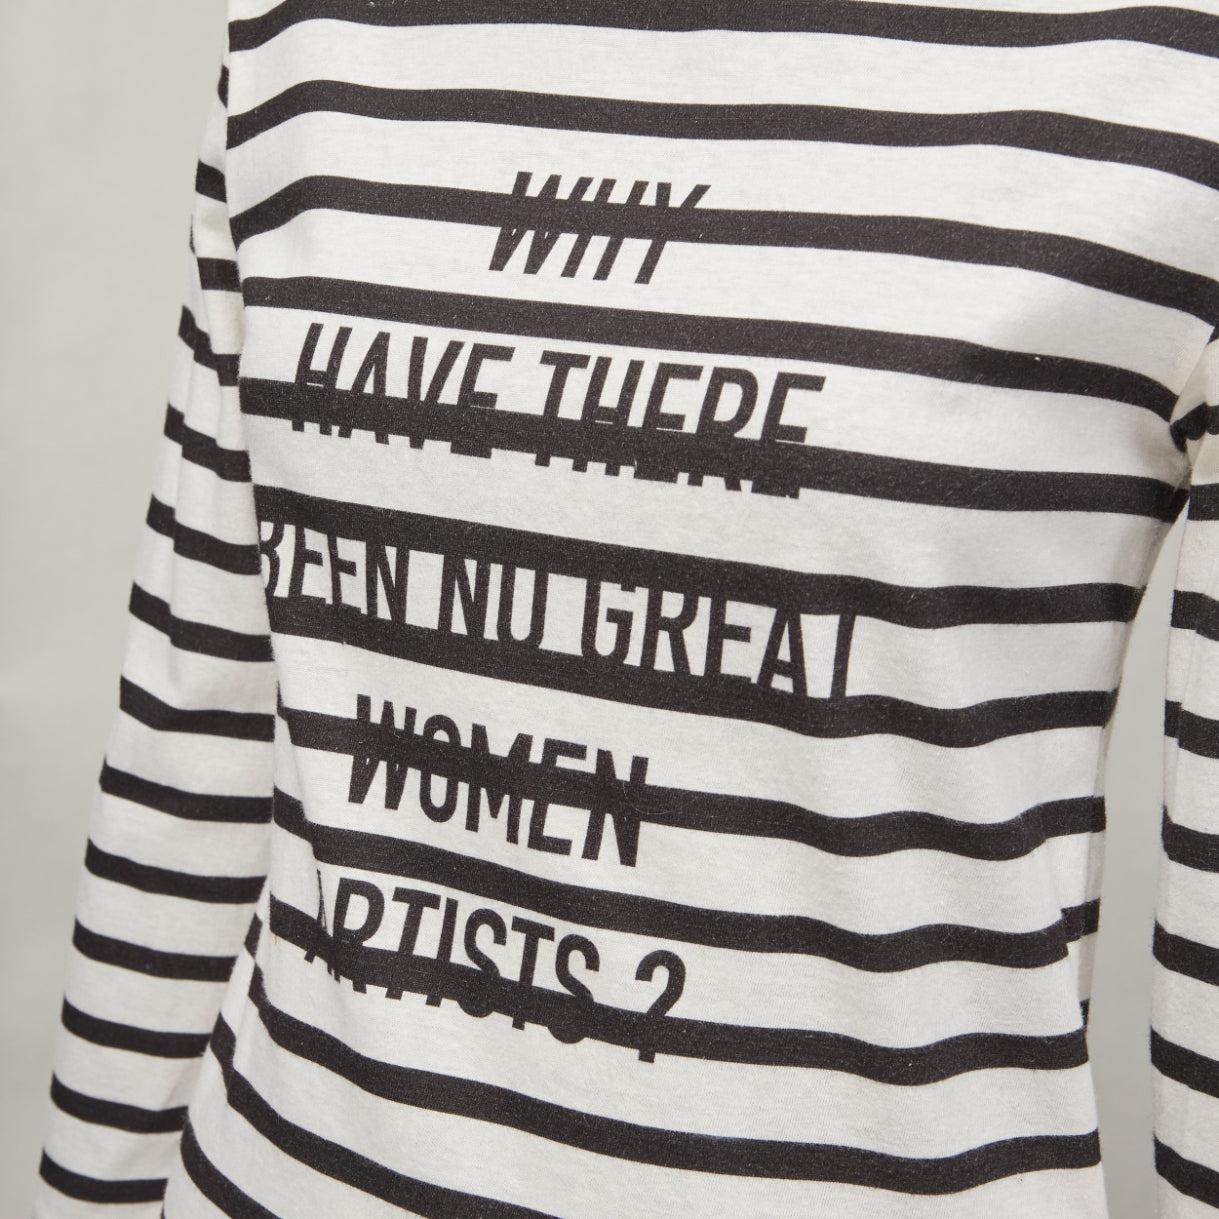 DIOR 2018 Runway No Great Women Artists striped cotton linen striped tshirt XS For Sale 4